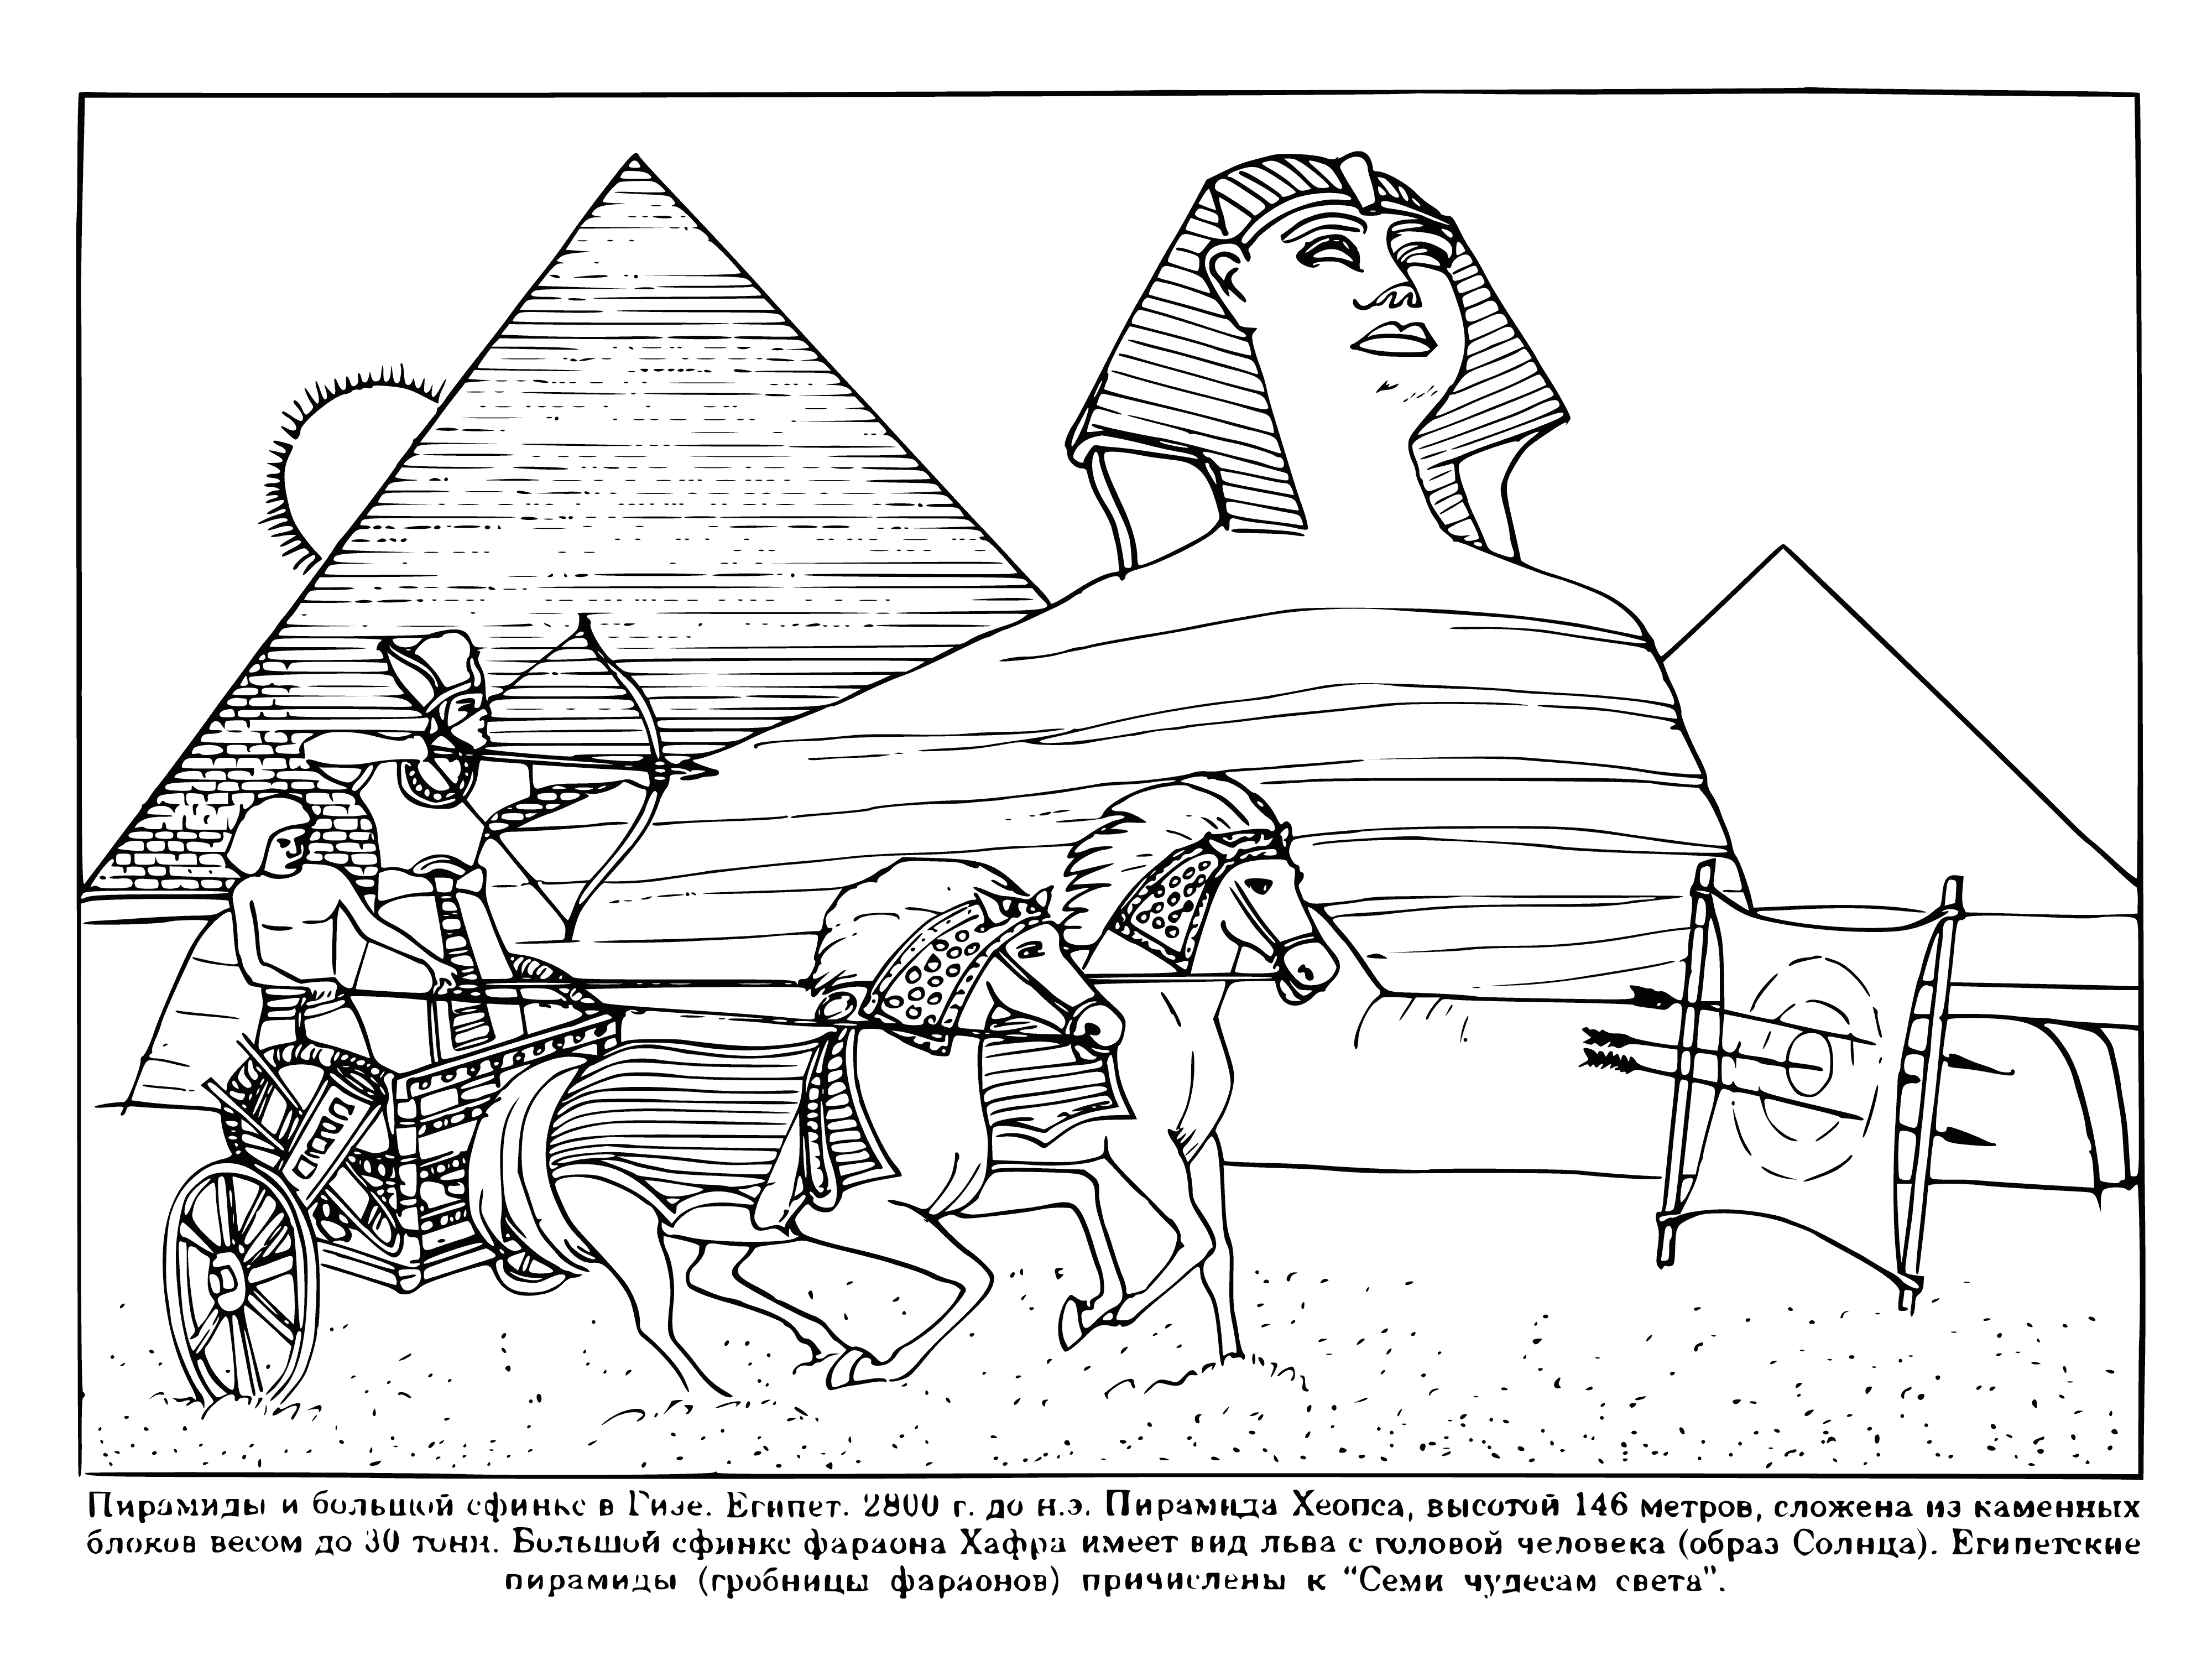 Egyptian pyramids coloring page